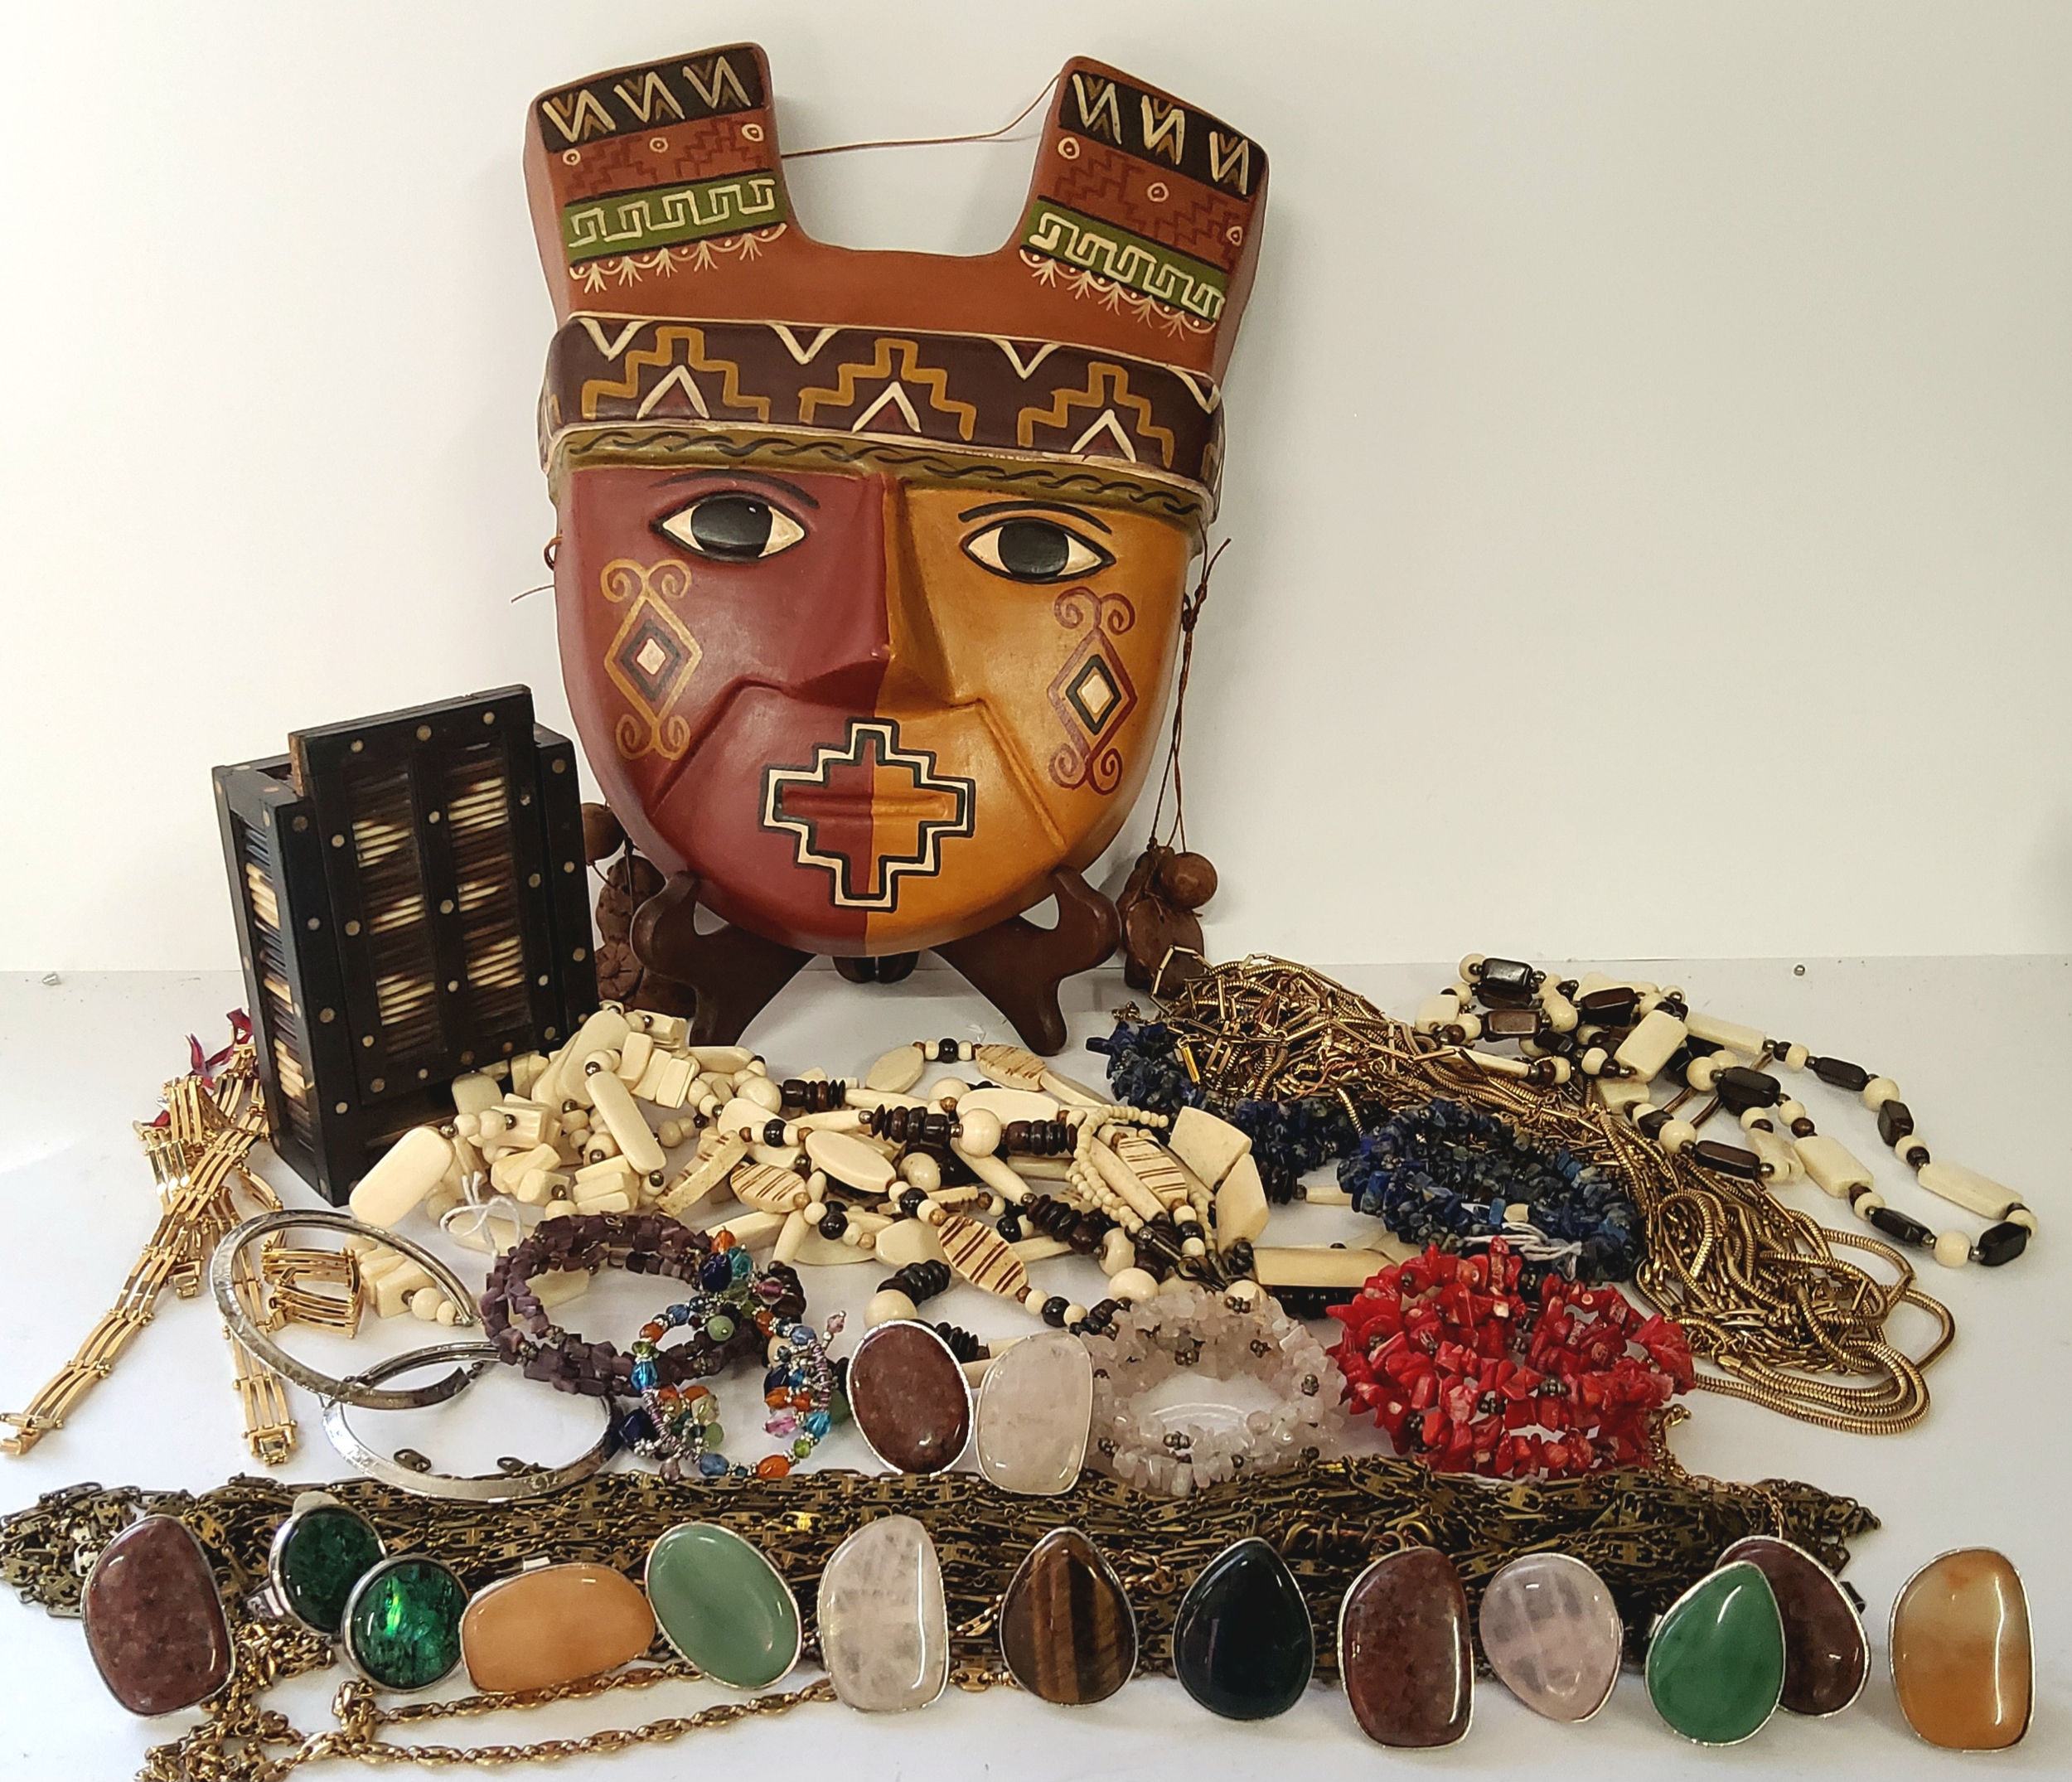 A porcupine quill box, Pre Columbian type mask, birthstone rings, gold plated bracelets, stone